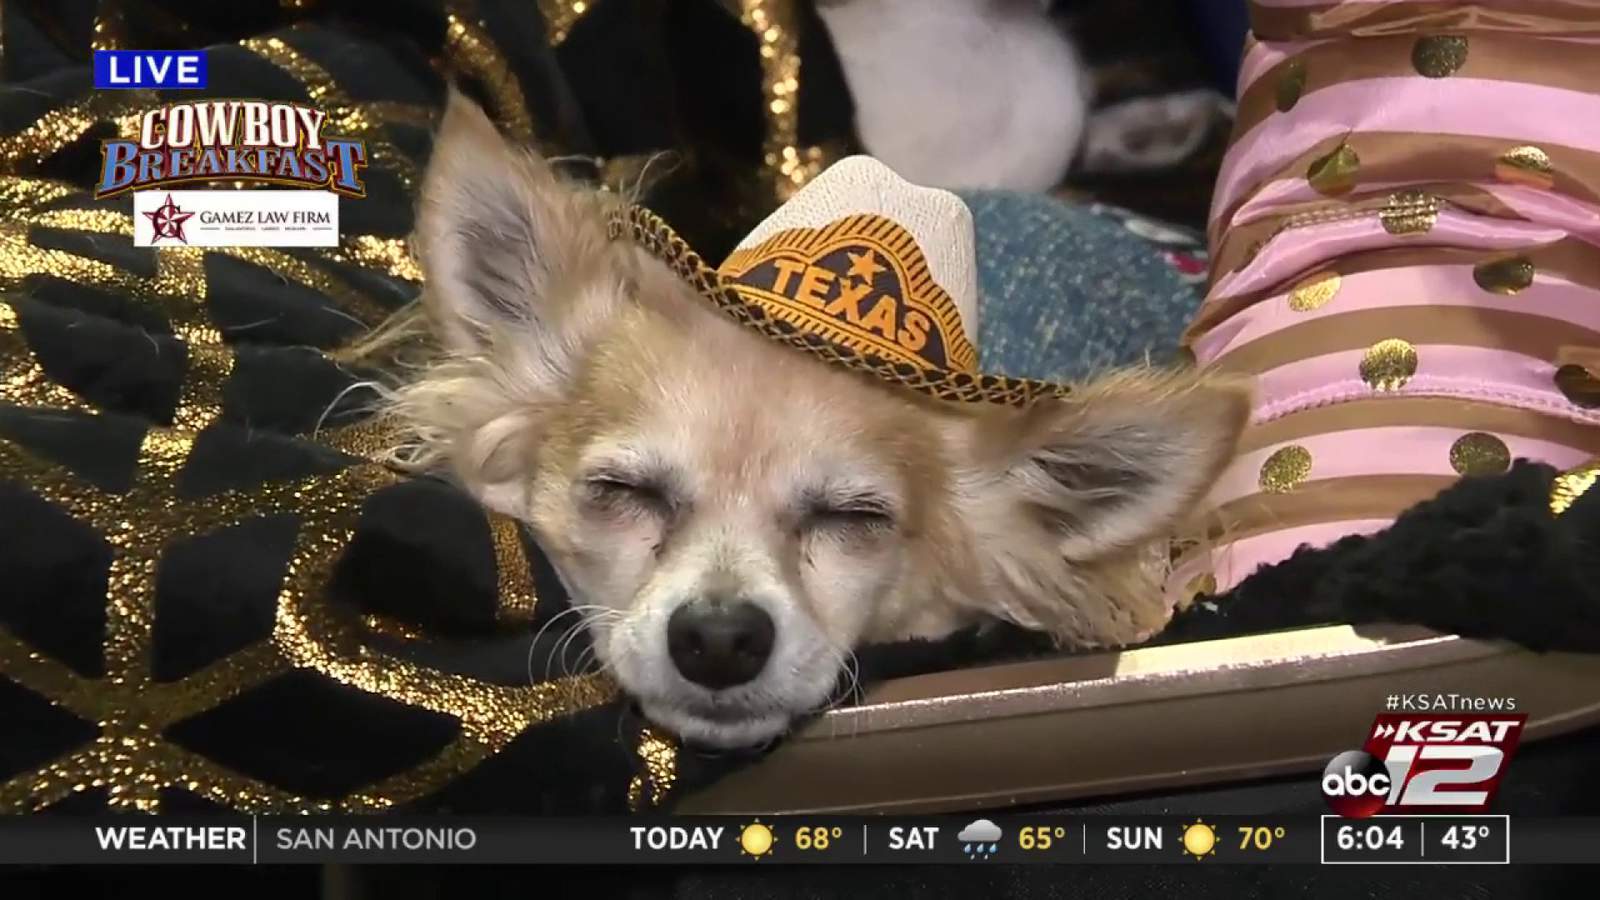 KSAT's Sarah Acosta finds doggies dressed up for Cowboy Breakfast, talks to guests